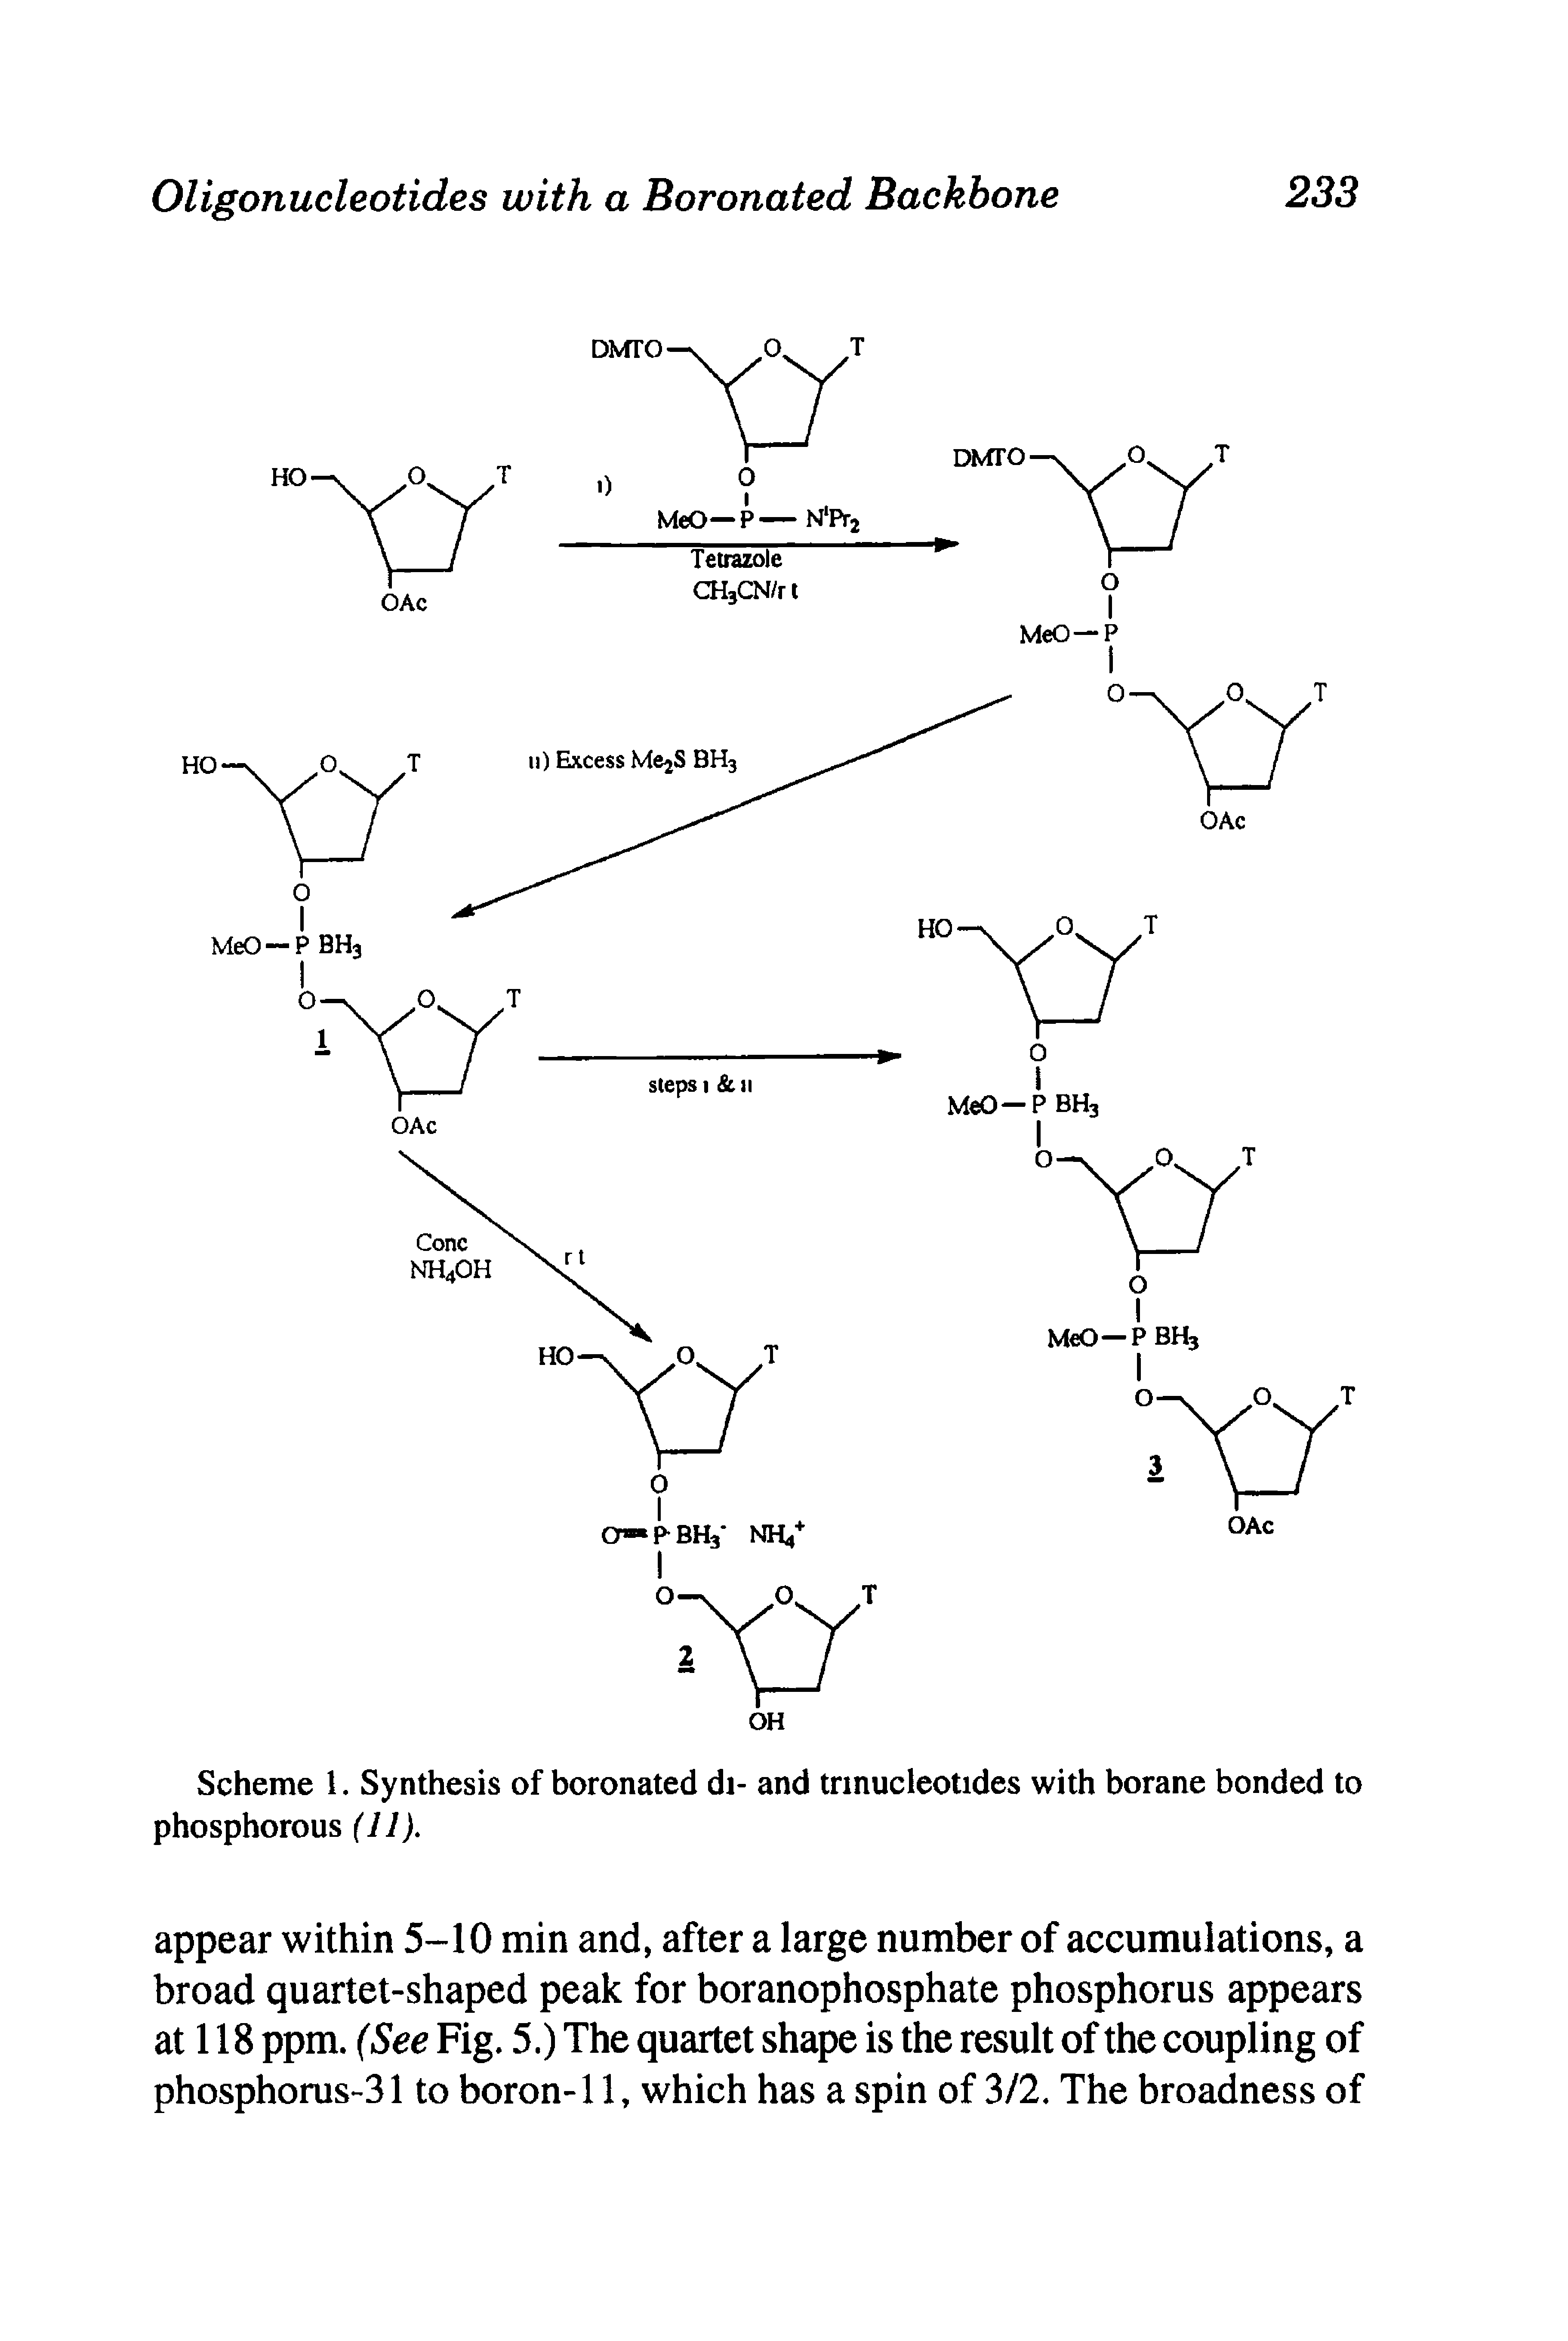 Scheme 1. Synthesis of boronated di- and trinucleotides with borane bonded to phosphorous (11).